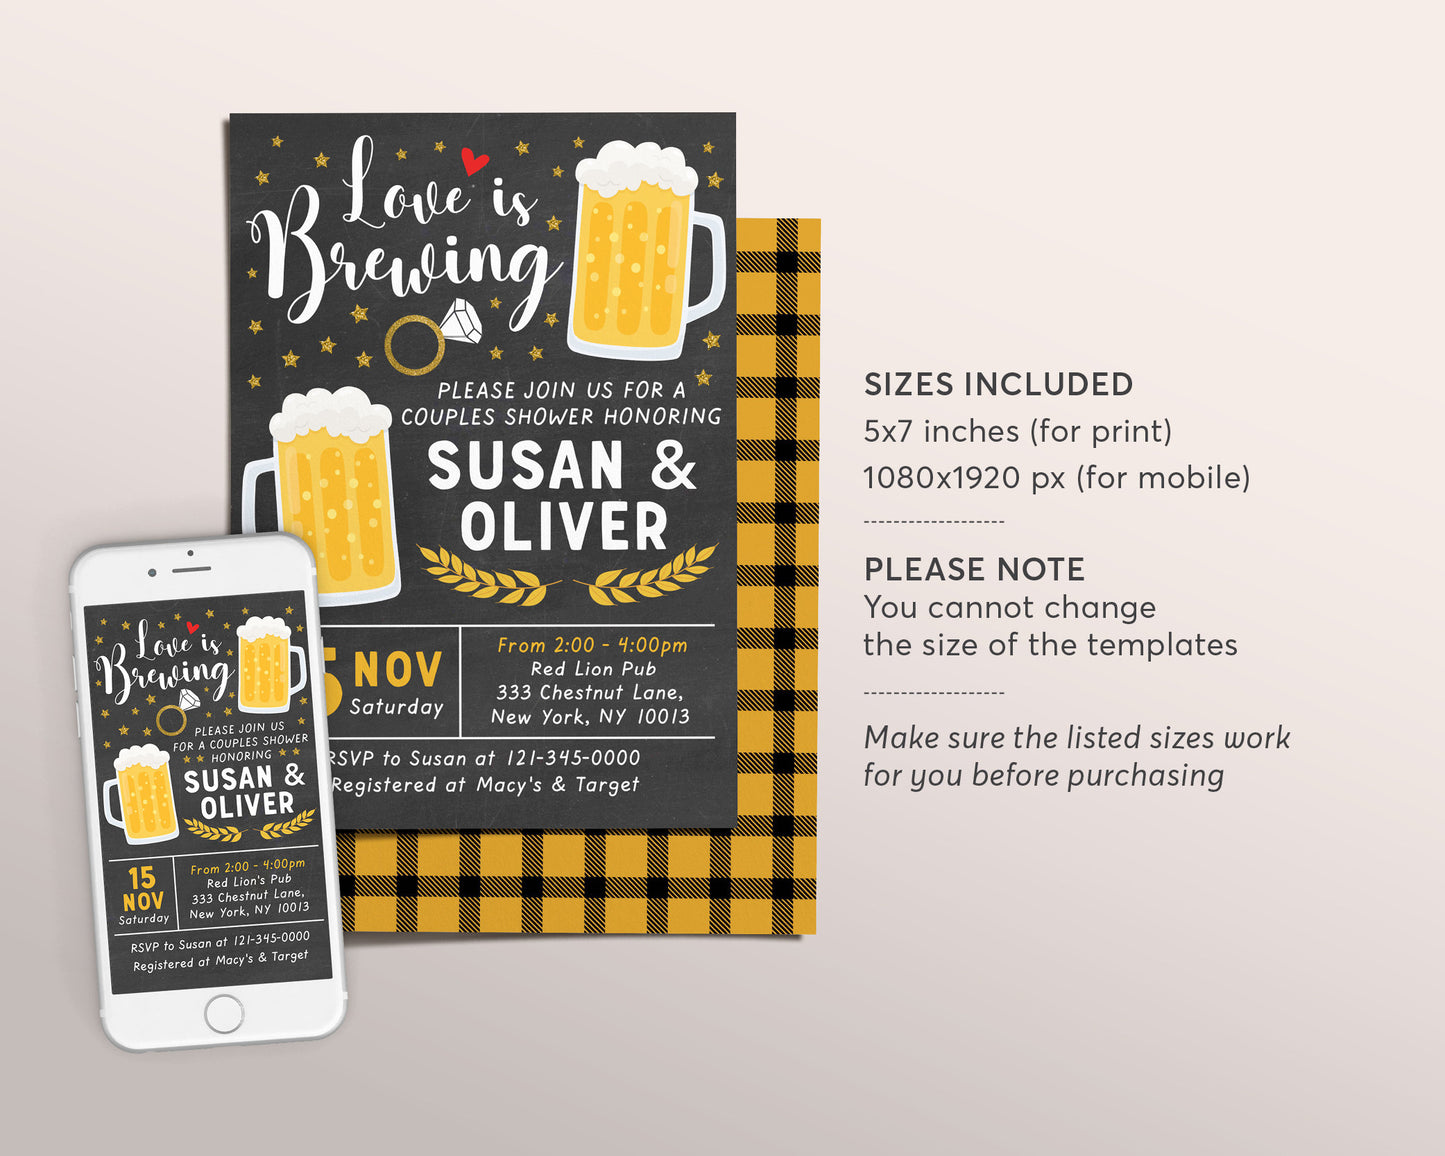 Love is Brewing Couples Shower Invitation Editable Template, Beer Keg St Patricks Day Pub Party Themed Invite, Bridal Shower Wedding